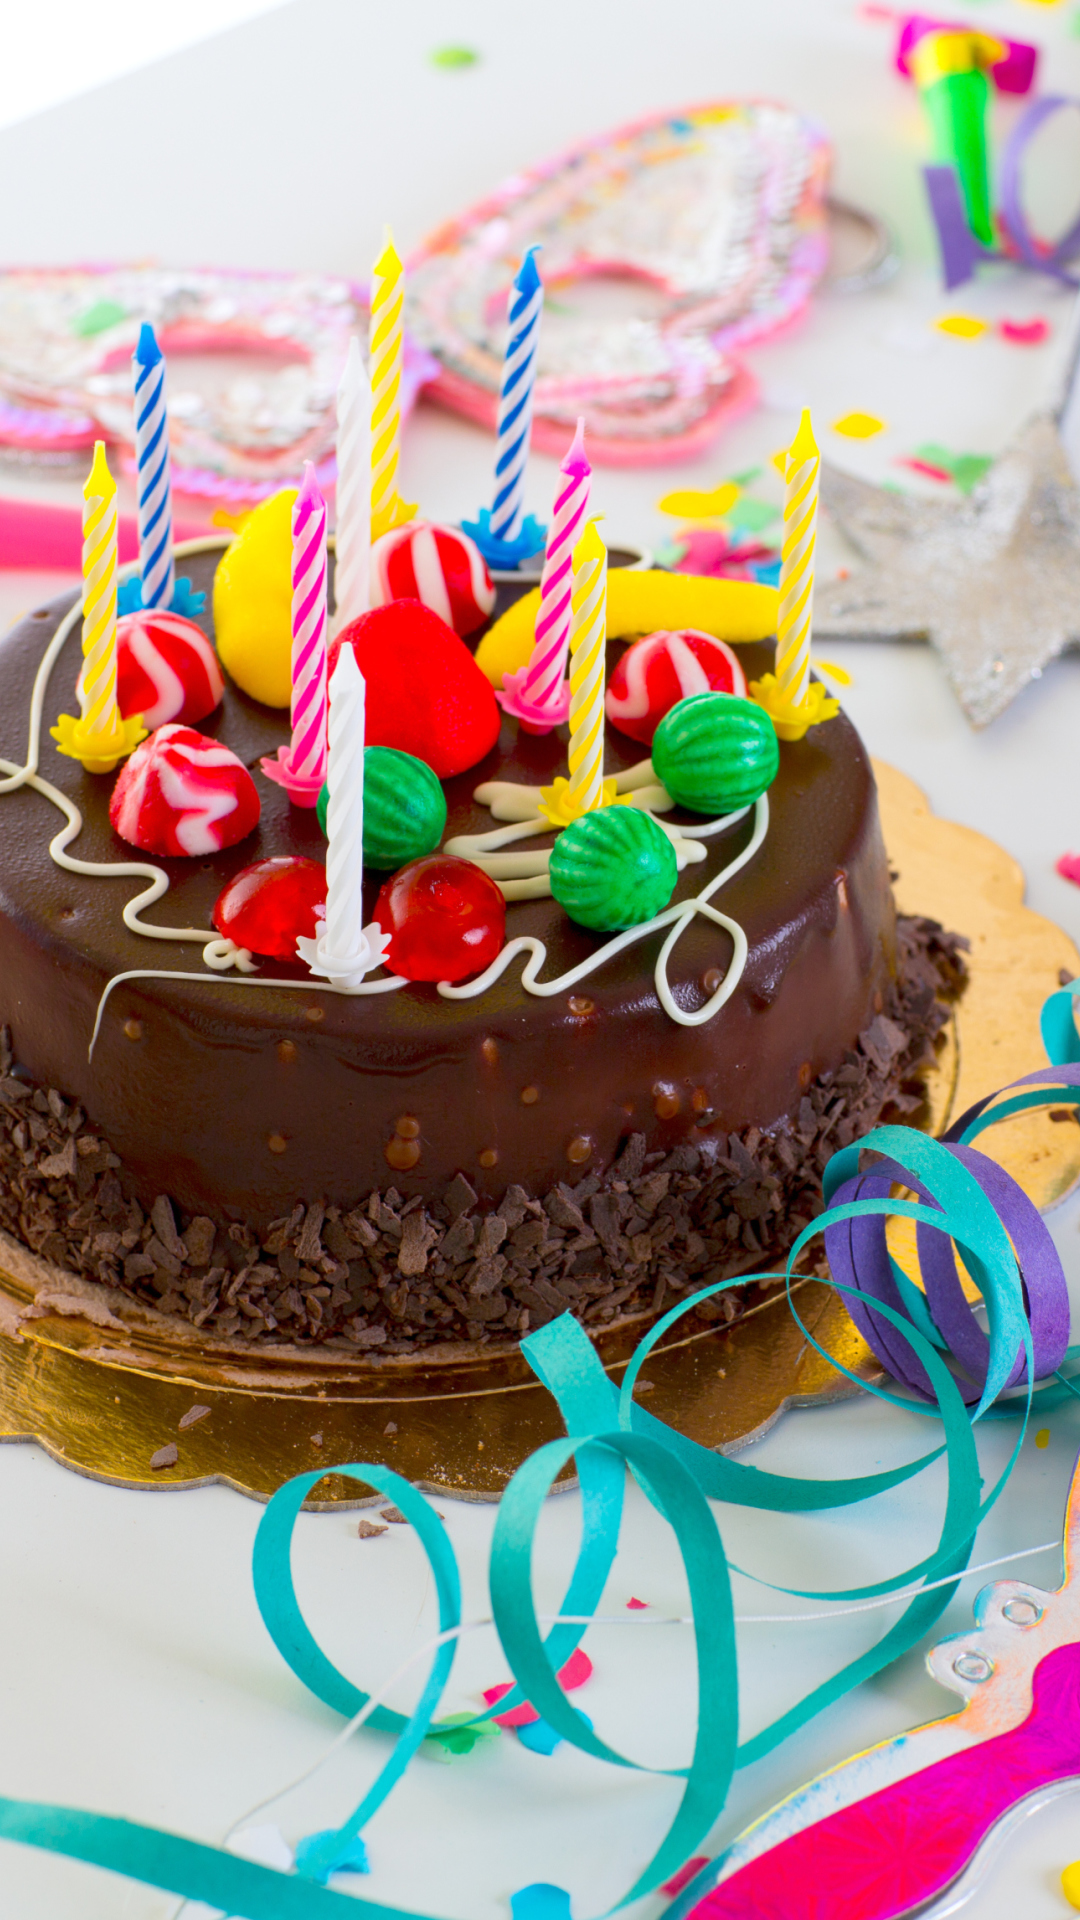 Birthday Cake With Candles wallpaper 1080x1920